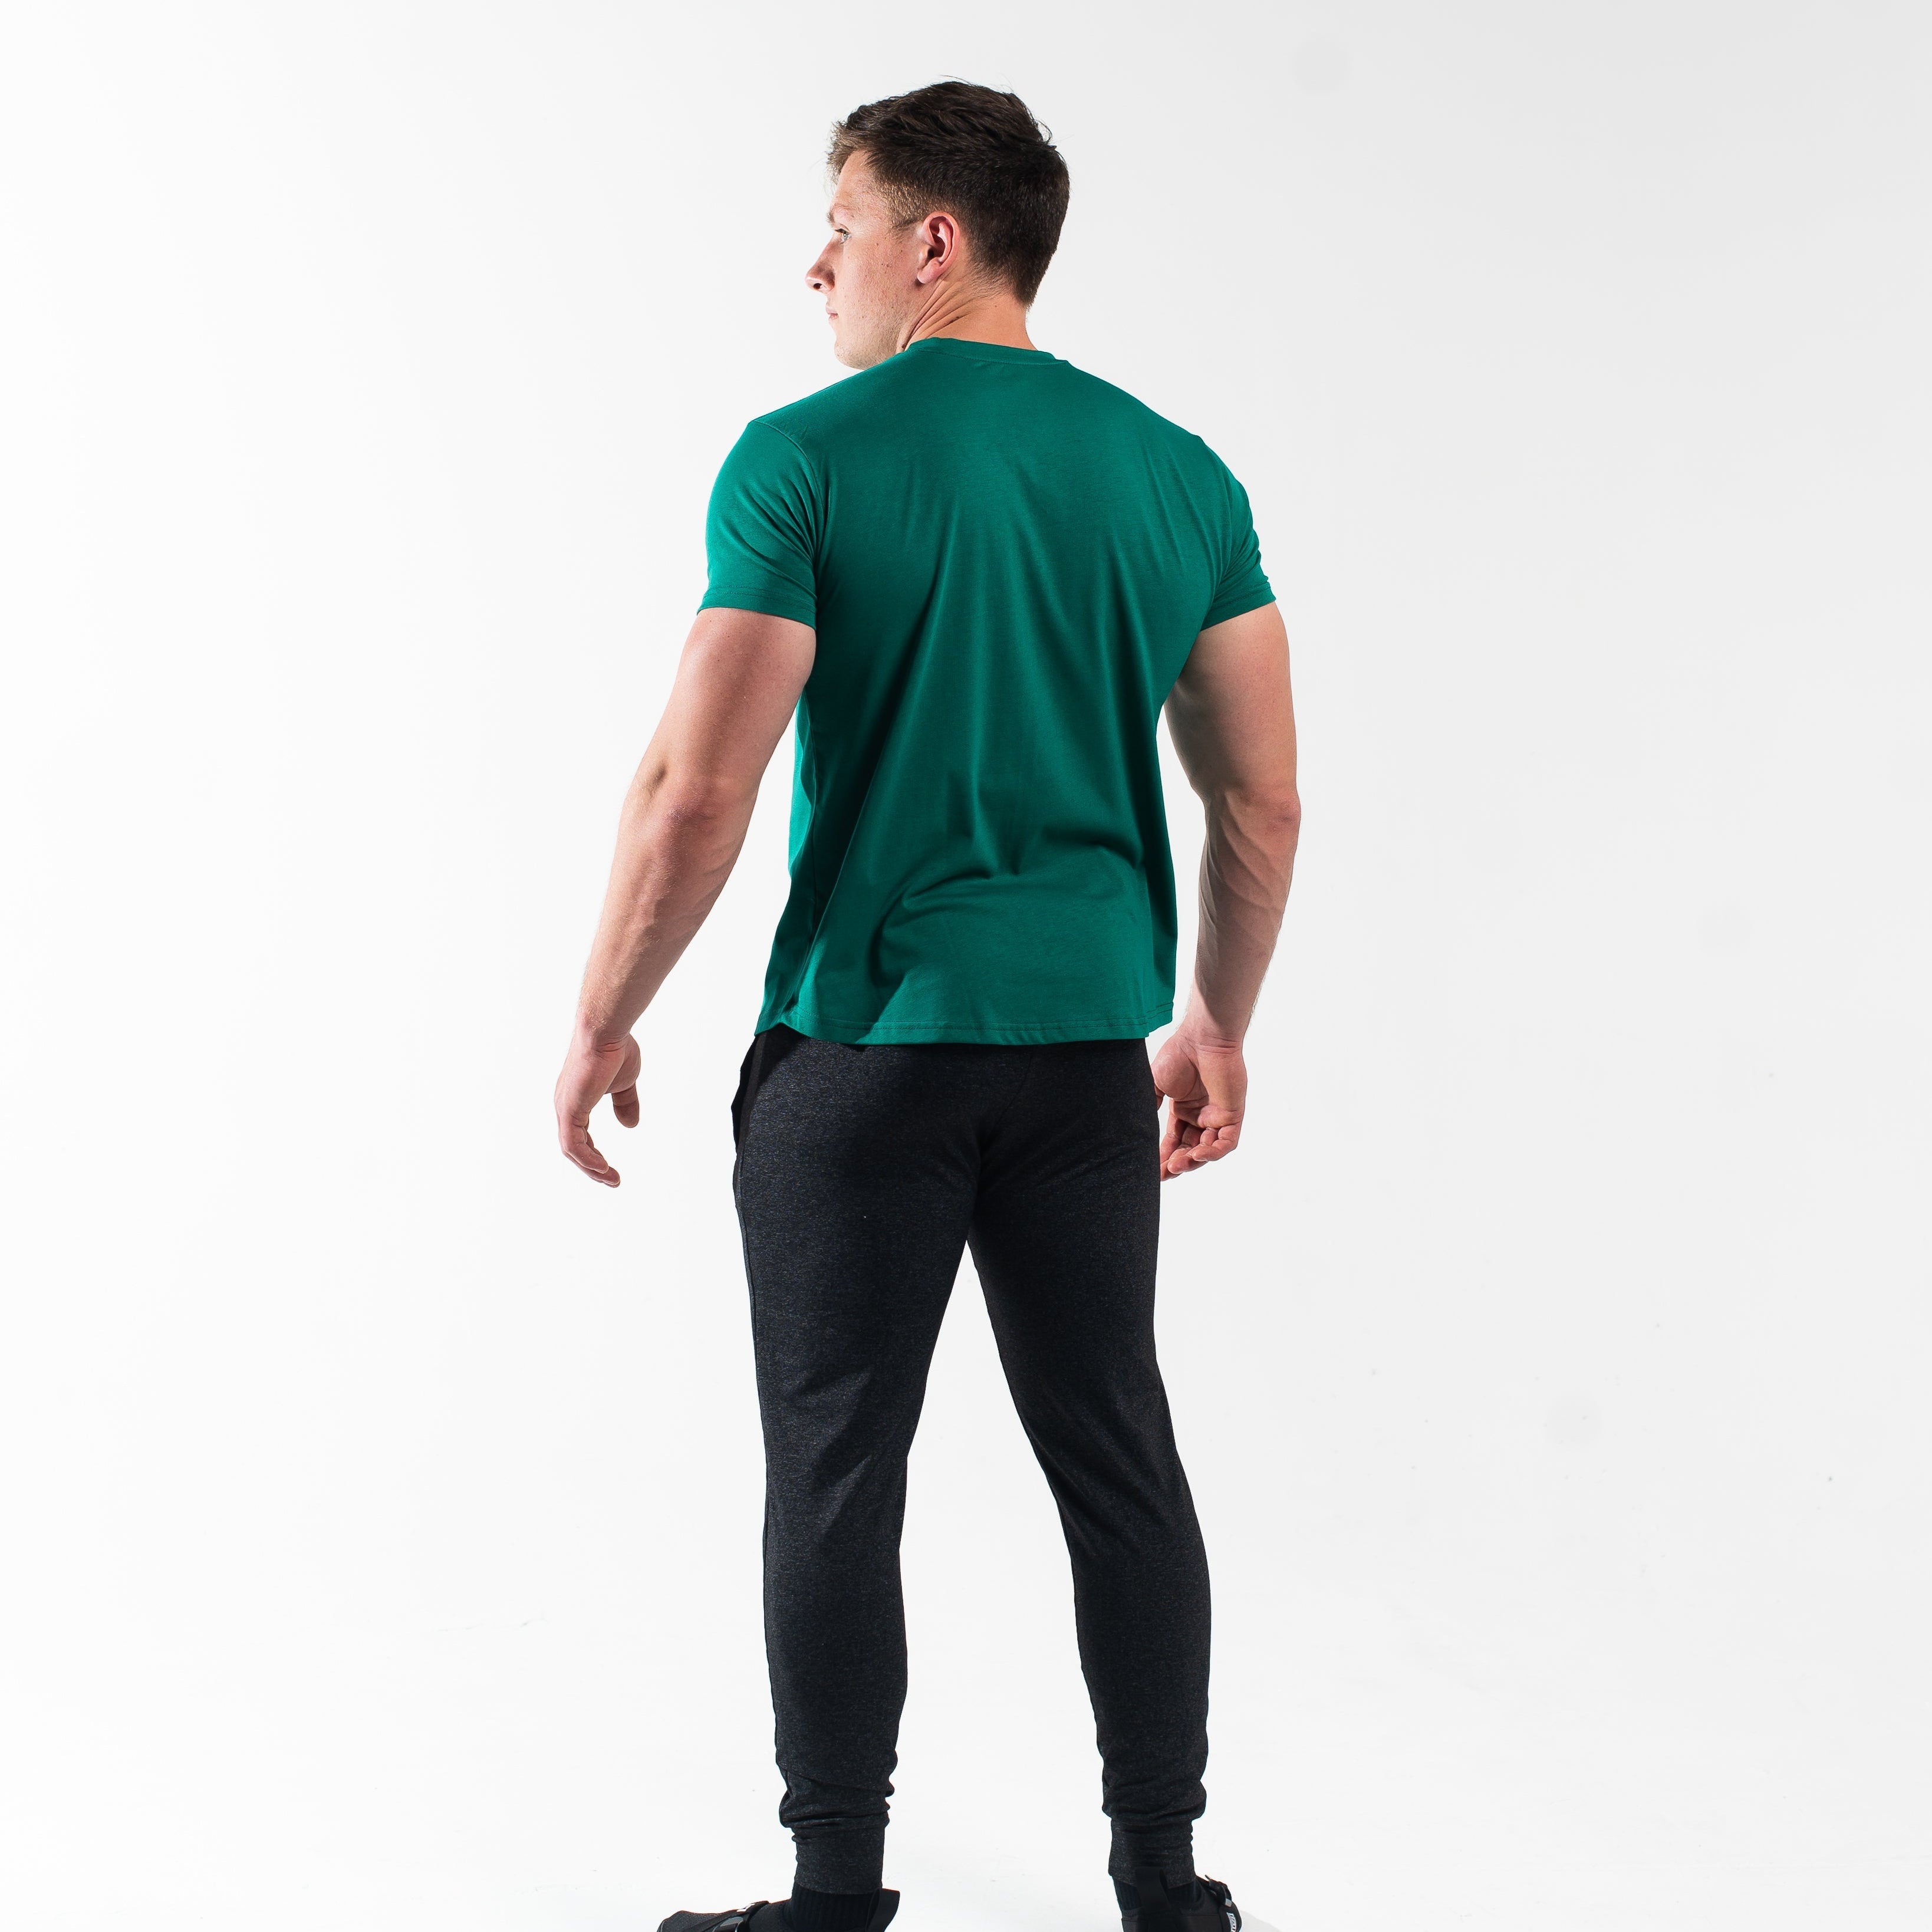 The Balance Collection combines comfort and aesthetics. The pieces in this collection are made with comfortable fabrics and minimal logos to create a simple, yet impactful look. Genouillères powerlifting shipping to France, Spain, Ireland, Germany, Italy, Sweden and EU.